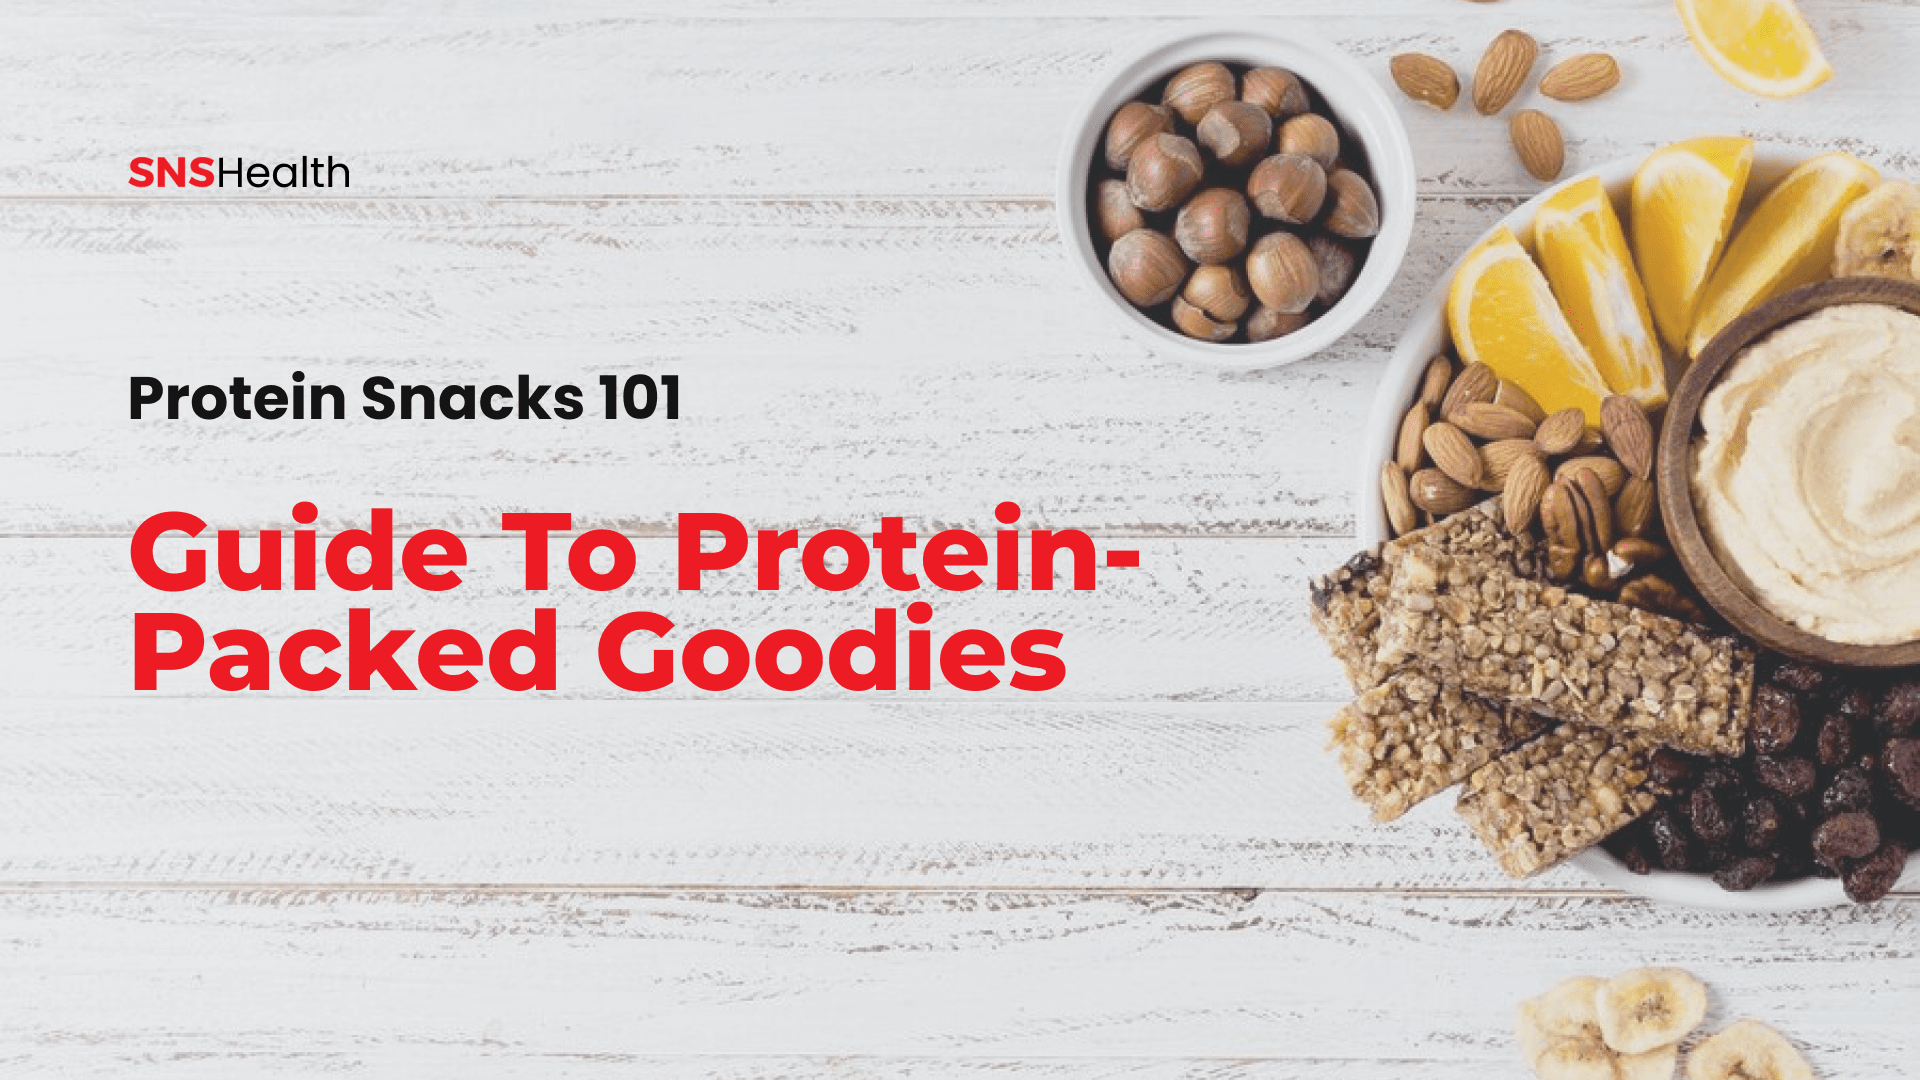 Protein Snacks 101 - Guide to Protein-Packed Goodies